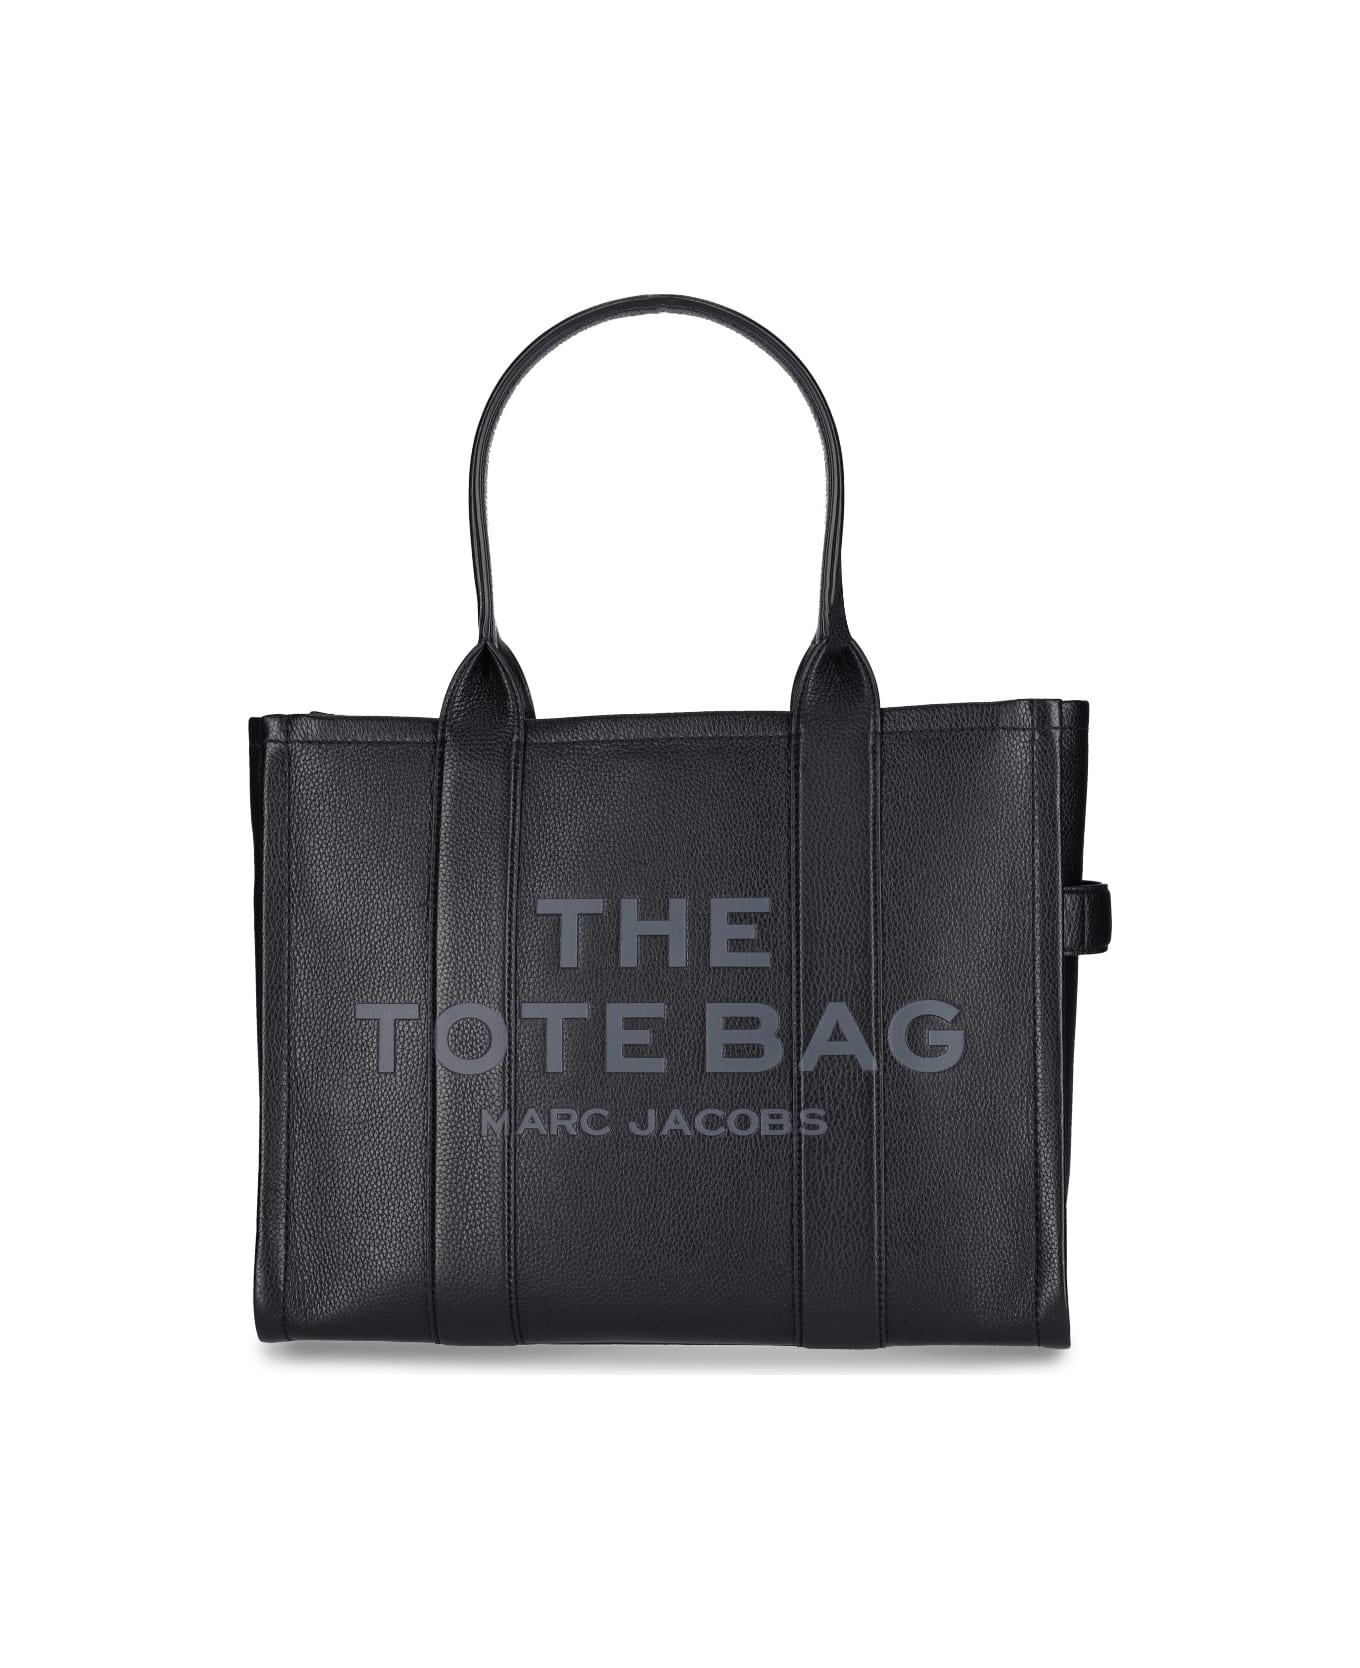 Marc Jacobs The Leather Large Tote Bag - Black トートバッグ